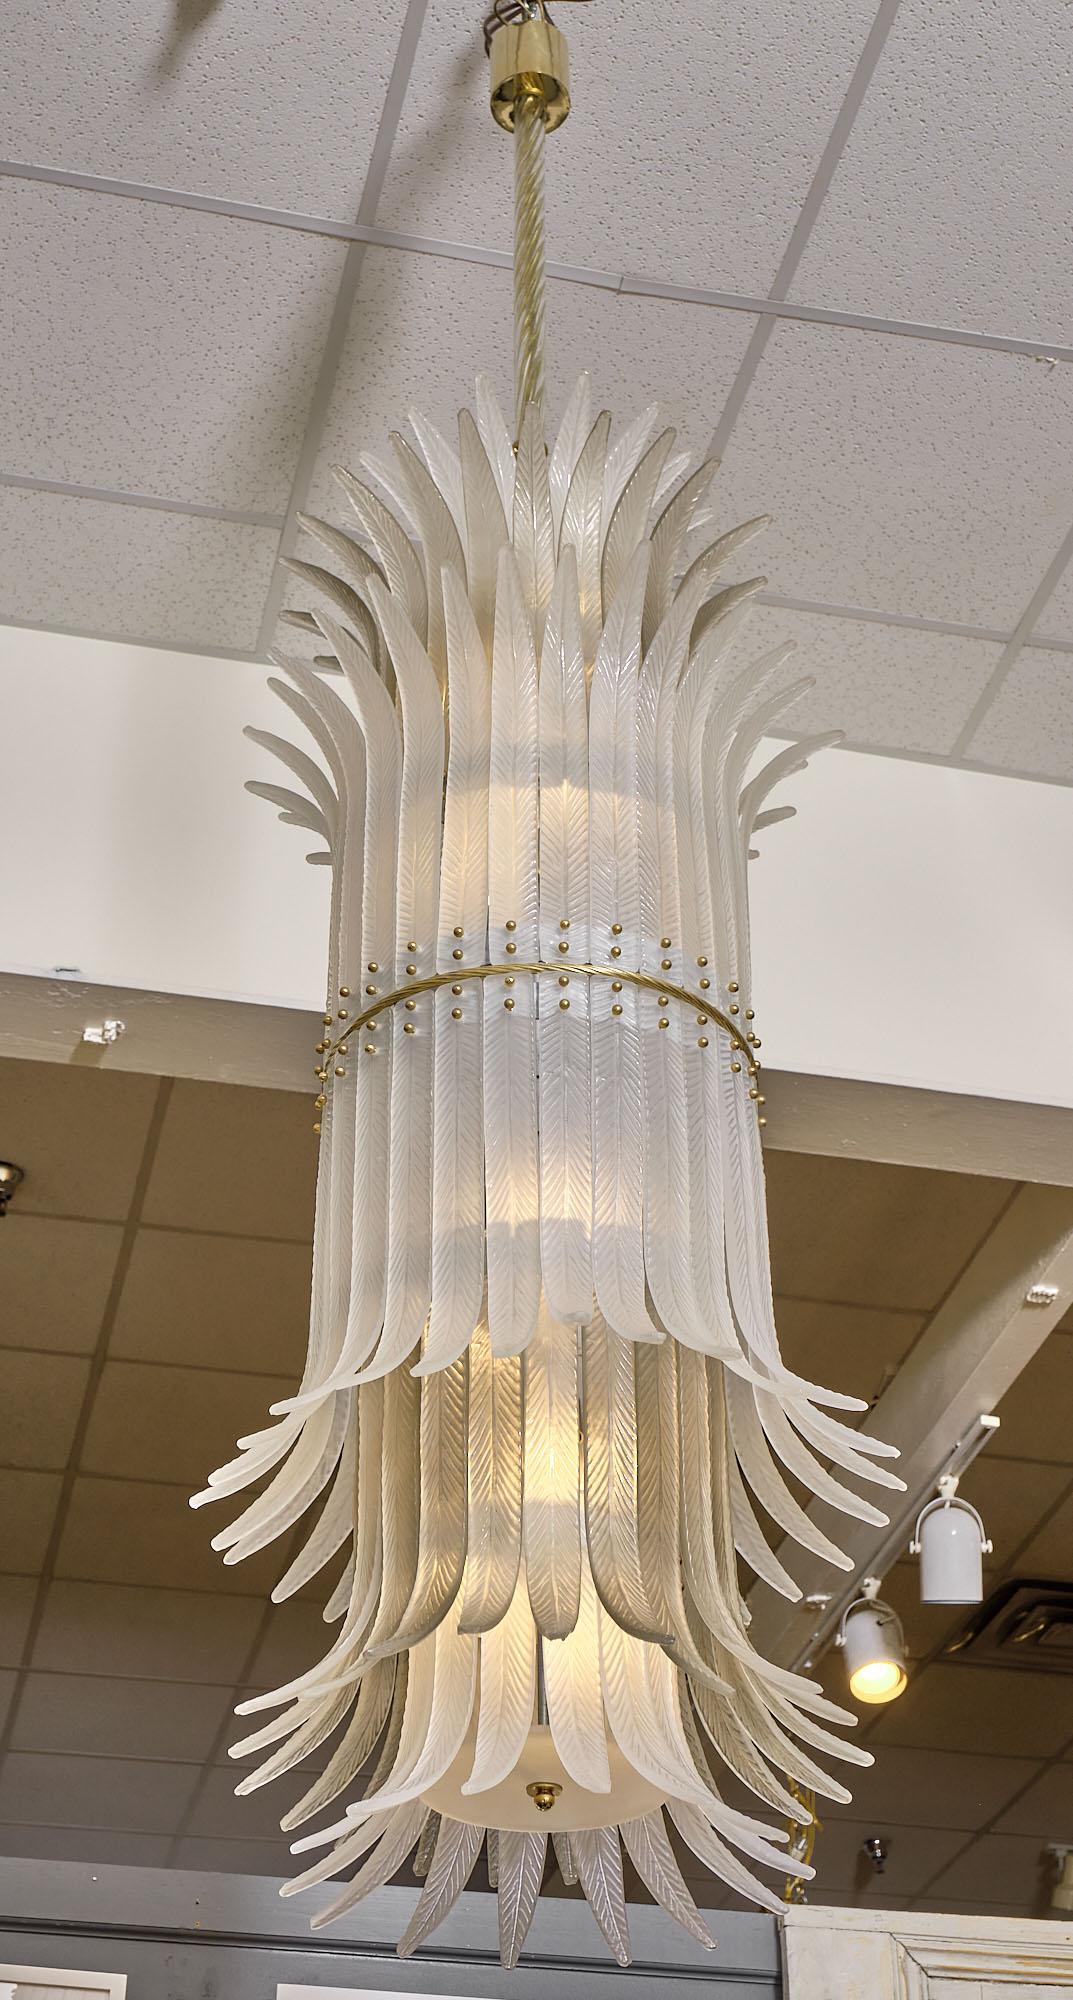 Murano glass chandelier made of multiple glass components or feathers attached to a circular structure. This piece has been newly wired to US standards.
Height from ceiling is 92.5